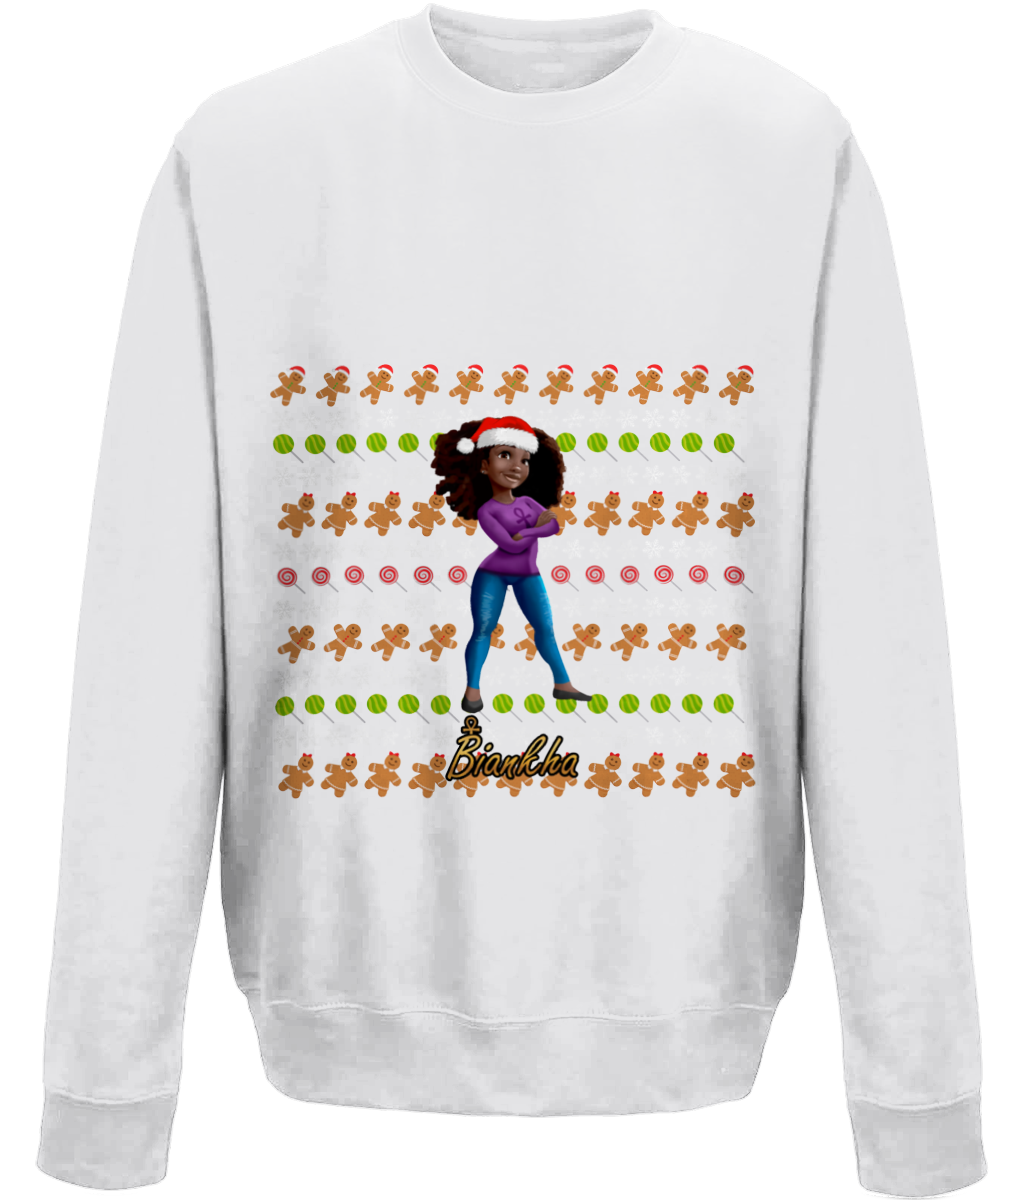 Biankha With Gingerbreads Kids Christmas Jumper